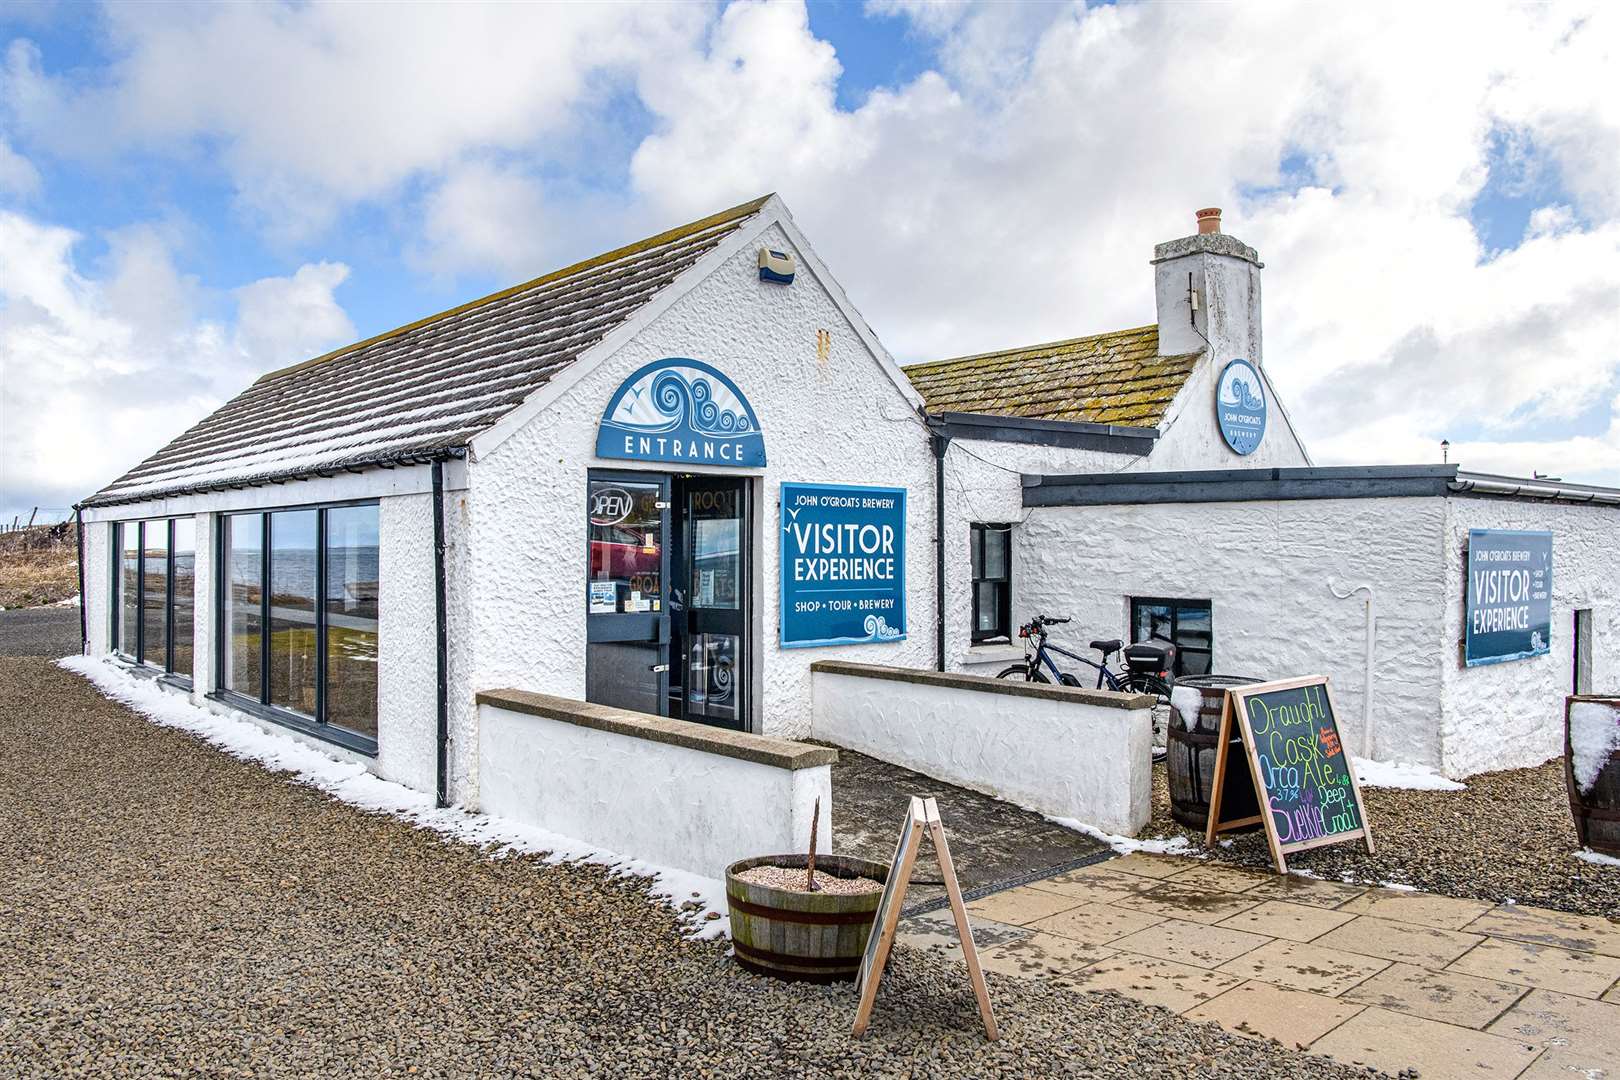 The John O’Groats Brewery is based in the historic 'Last House' in the village.